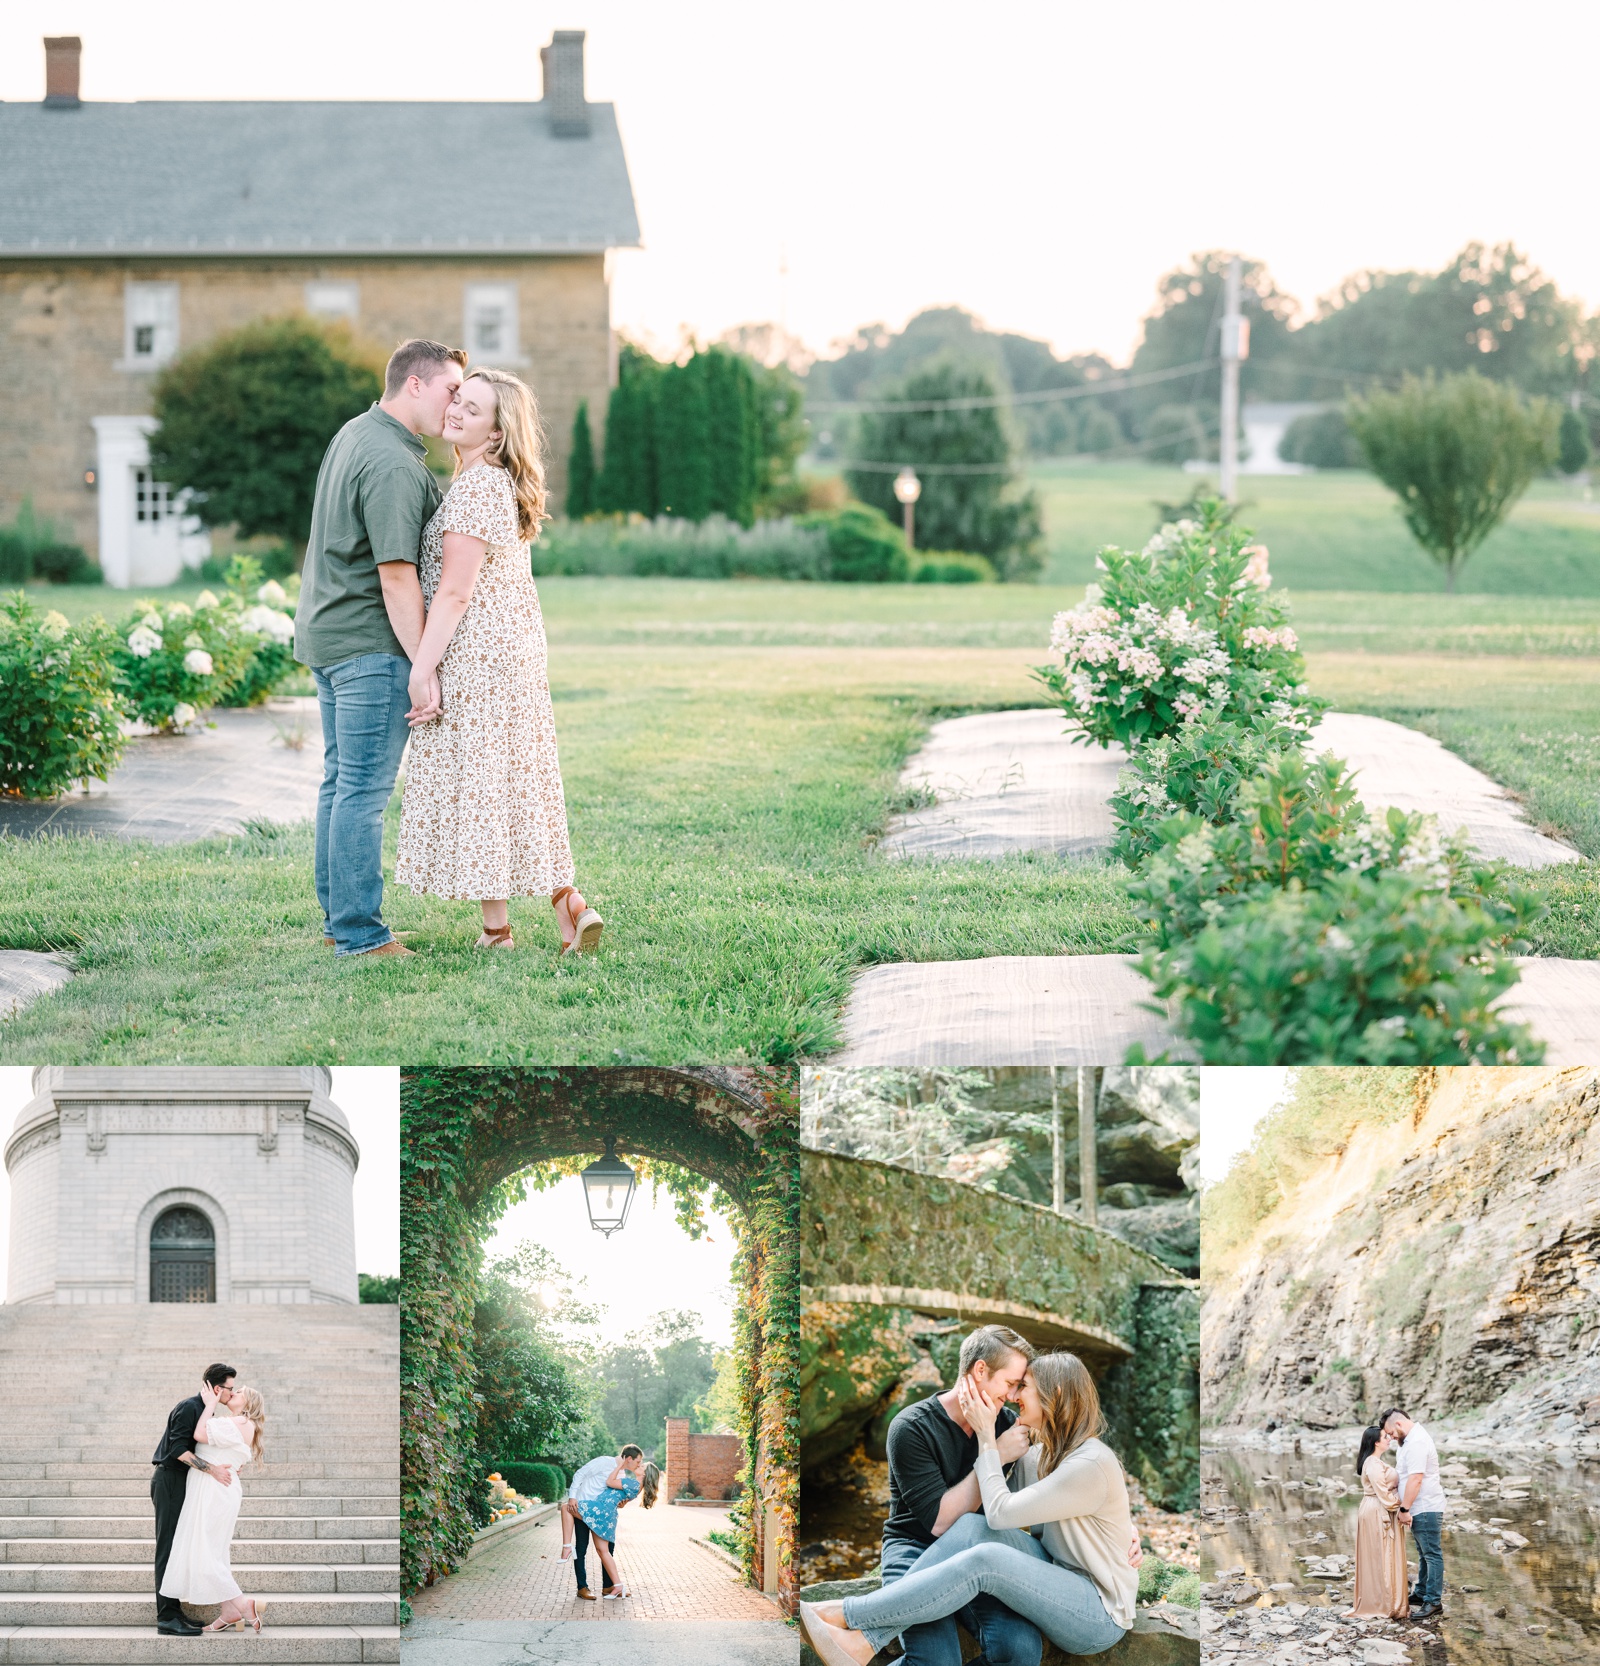 Top 5 Favorite Engagement Session Locations in Ohio